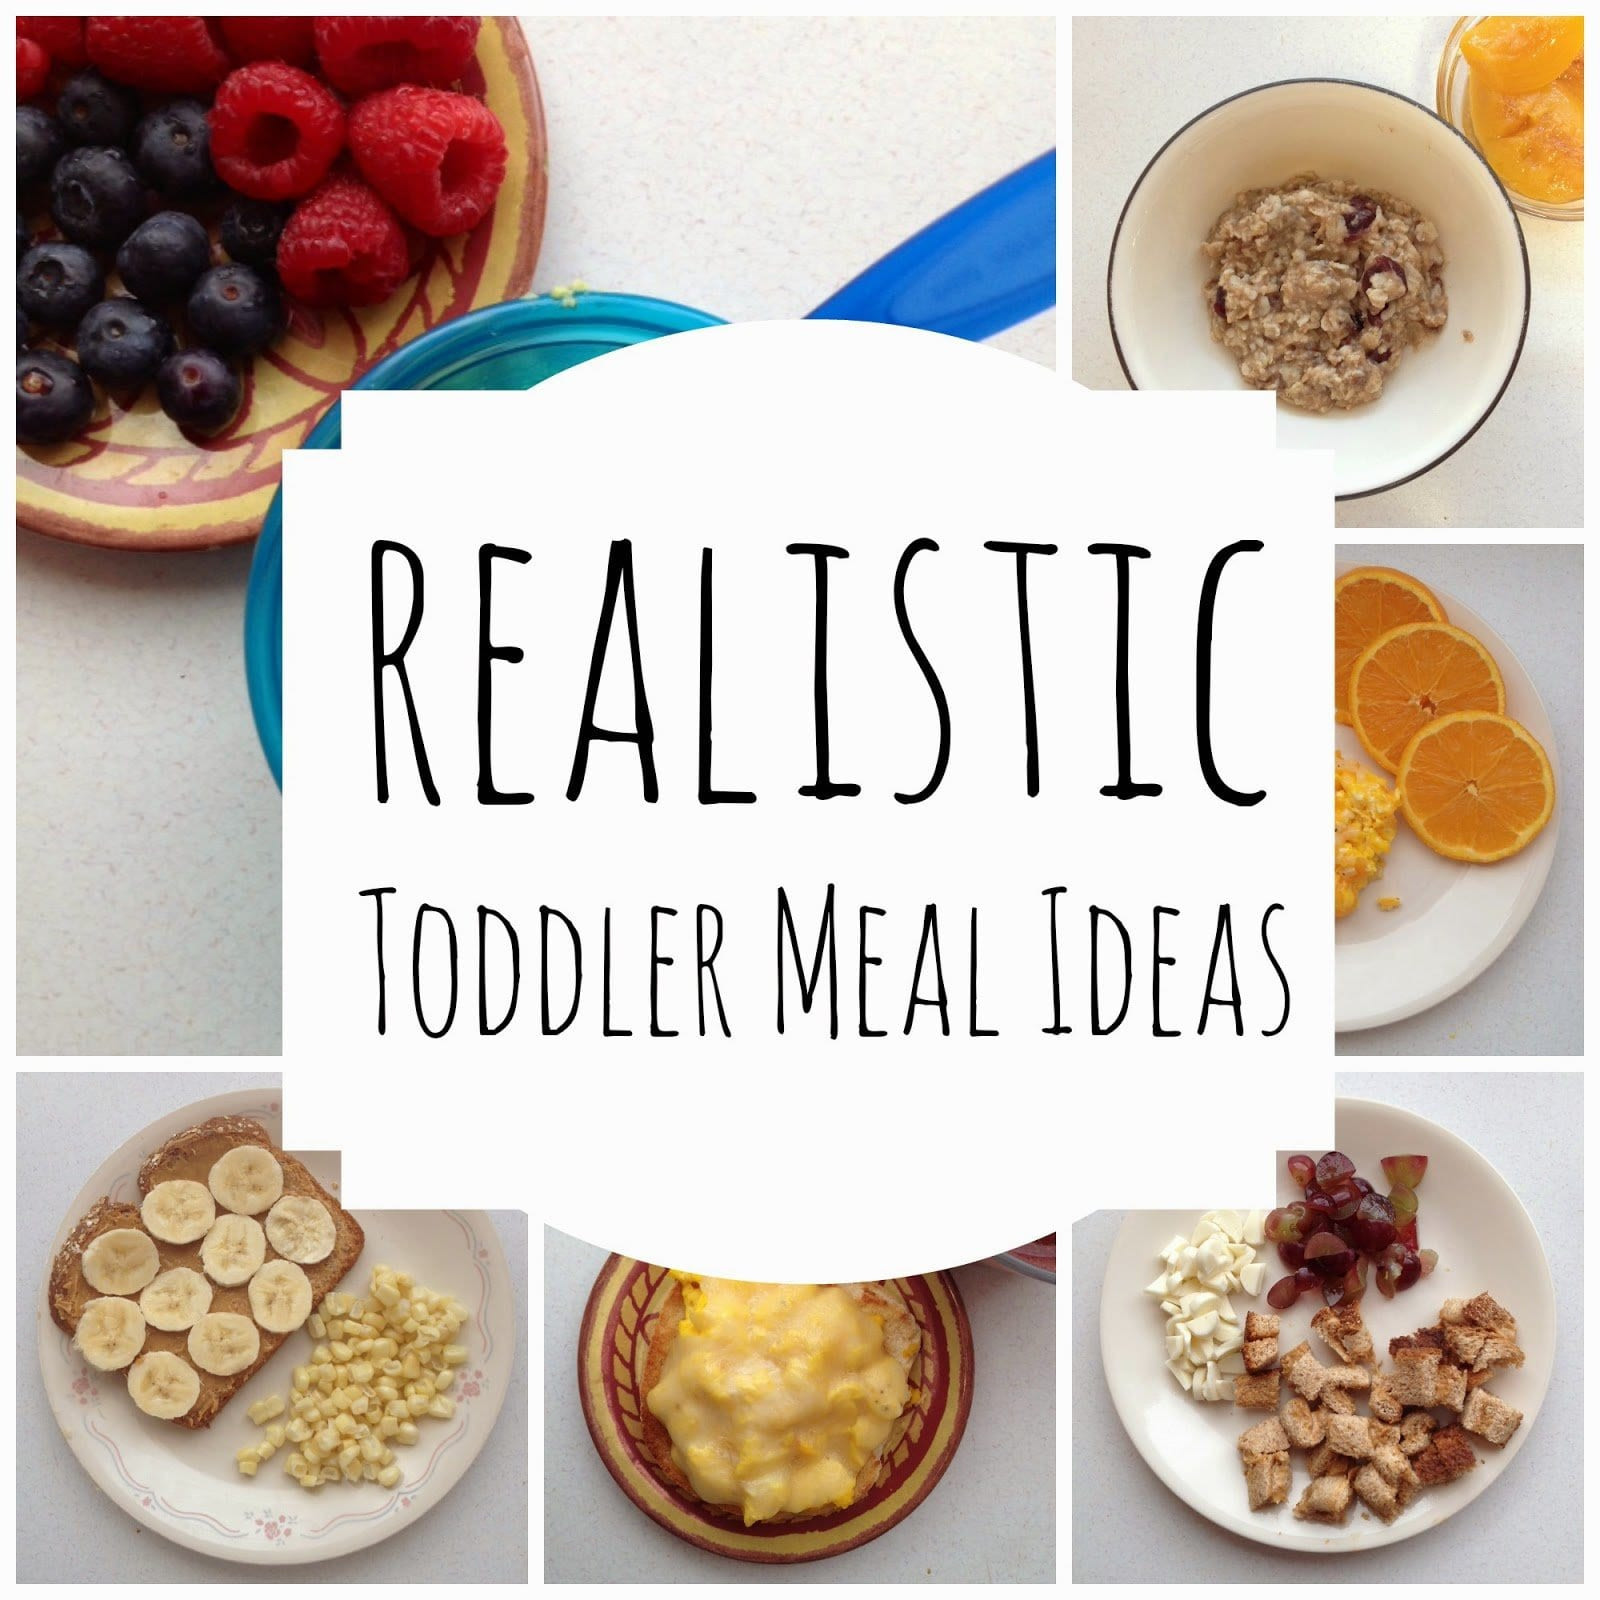 Dinner Ideas For 1 Year Old
 Realistic Toddler Meal Ideas Lou Lou Girls